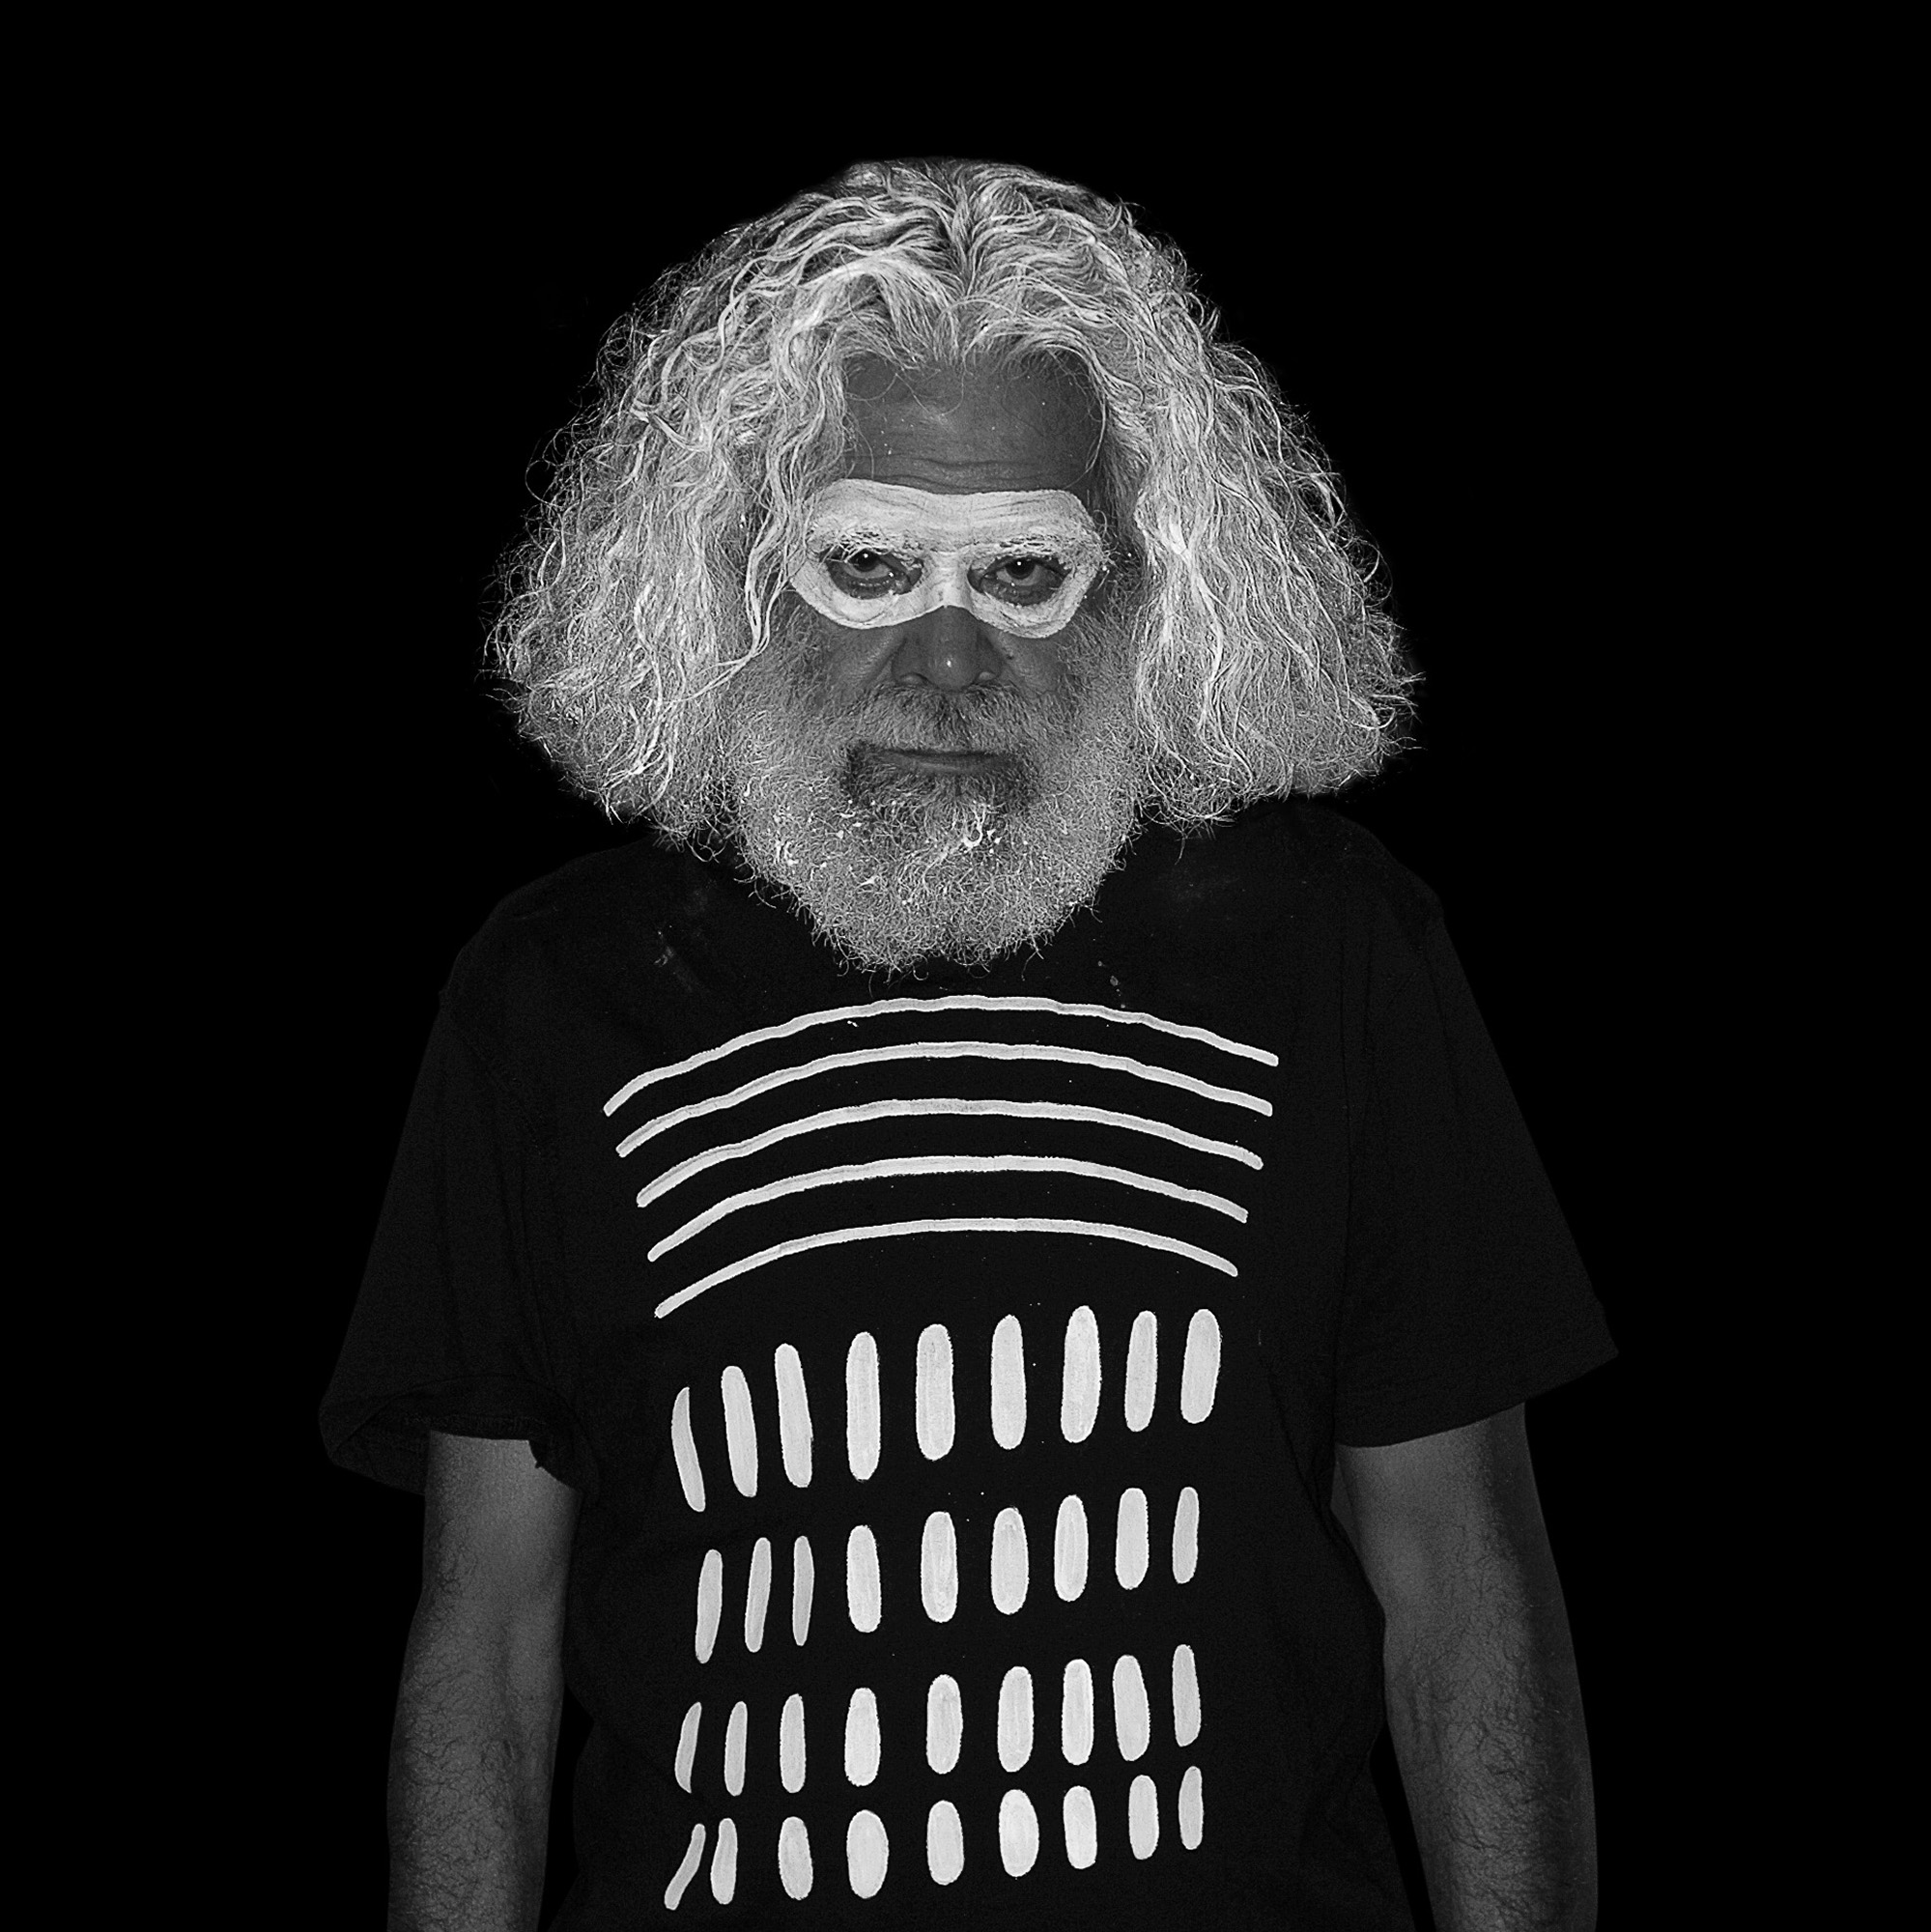 Photograph of Jack Charles, a 70-something Aboriginal man with a white beard, with white ochre smeared across his eyes